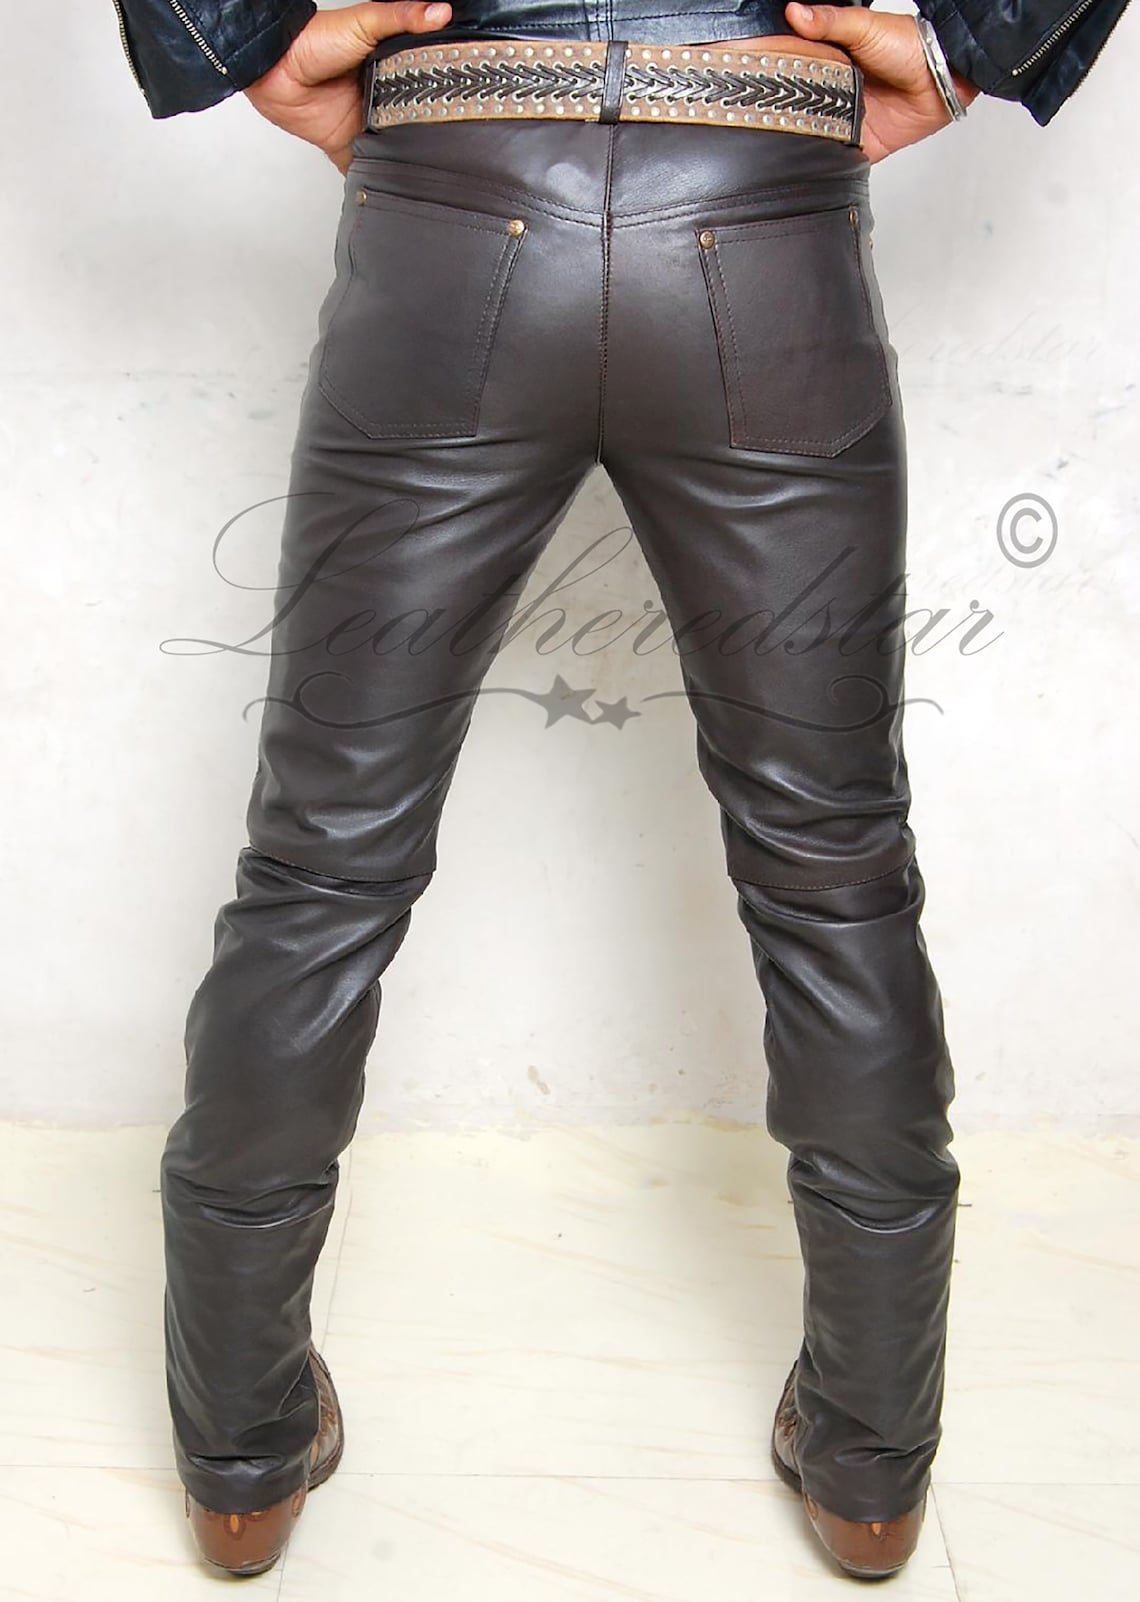 Dark Brown Leather Slimfit Soft Leather Jeans Pant 501 Style Fits Over ...